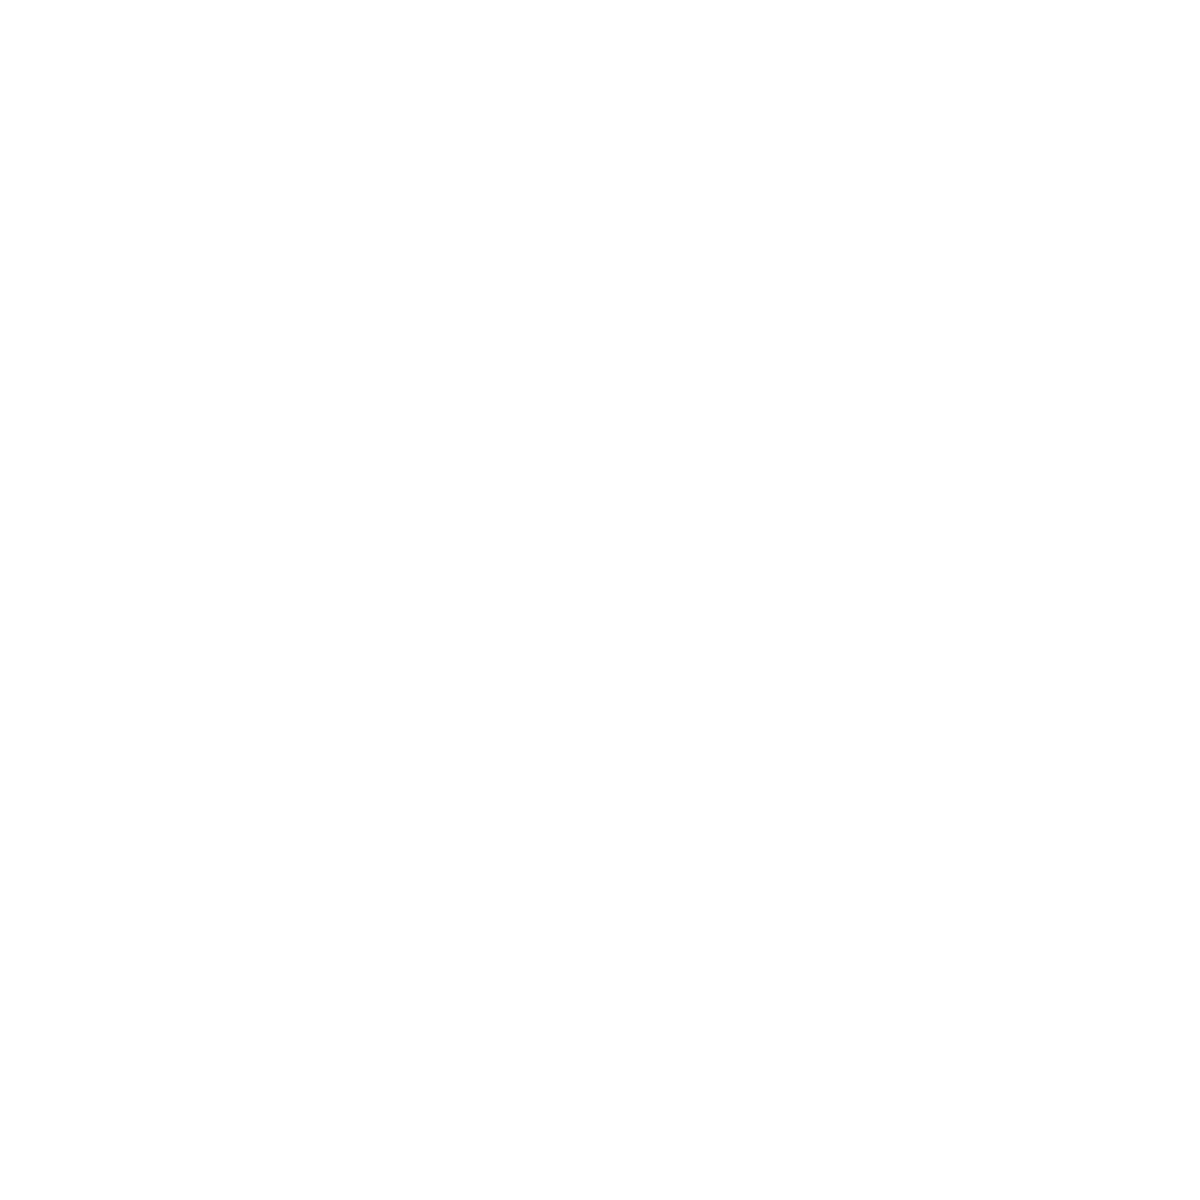 Smiling Face icon with arrows circling it